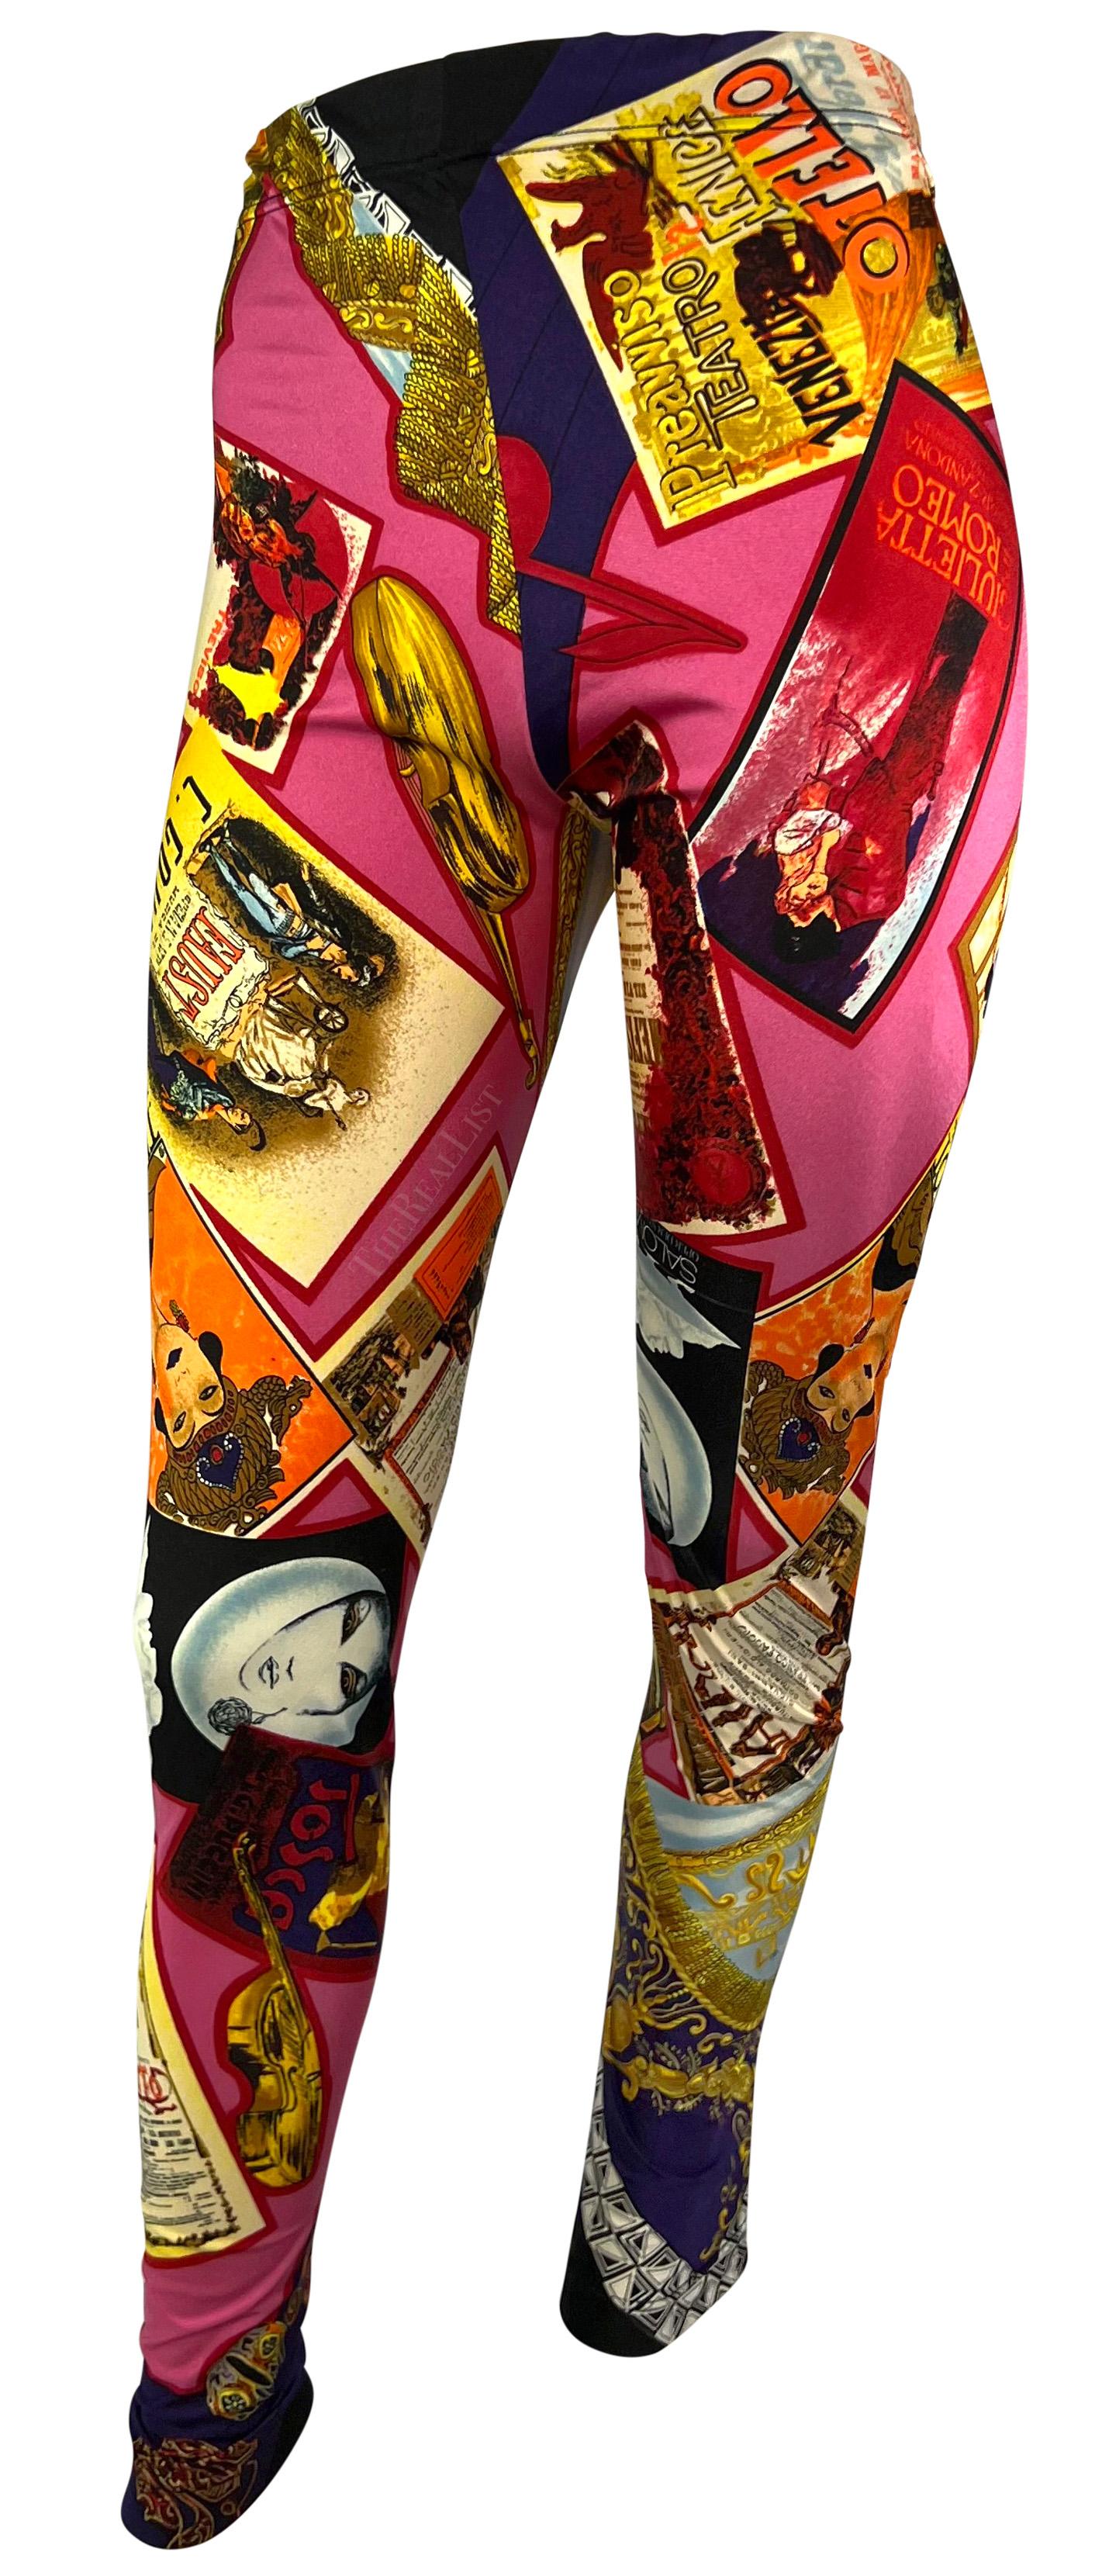 Presenting a pair of multicolor opera-motif Gianni Versace tights, designed by Gianni Versace. From 1991, these colorful leggings are covered in an opera motif that features playbills and other theater accouterments. These primarily pink tights are